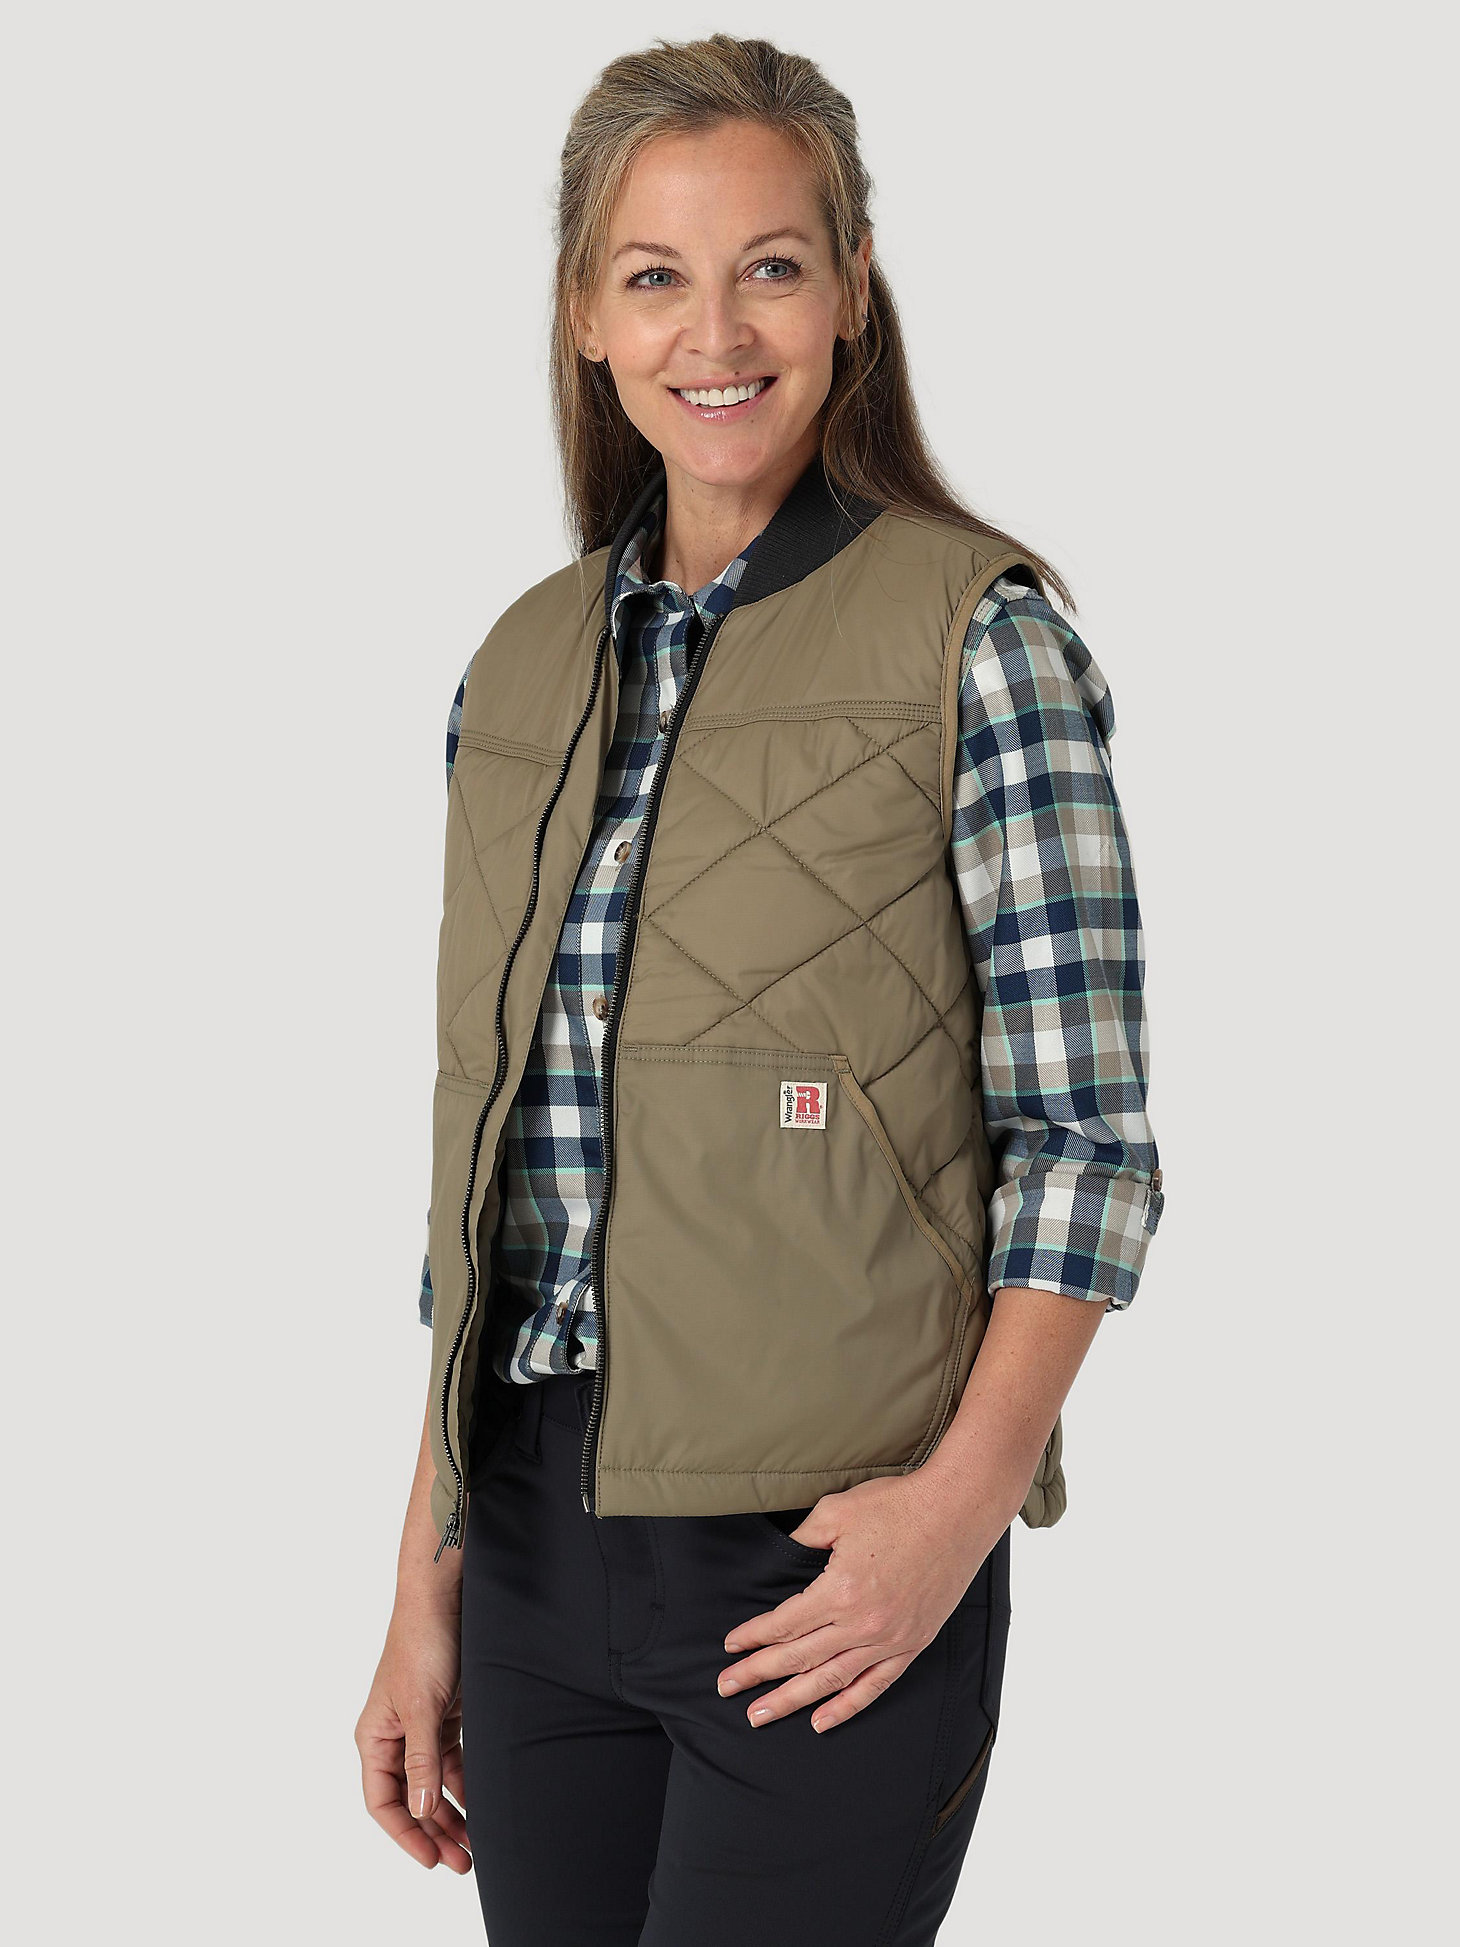 Womens RIGGS Tough Layers Quilted Work Vest in Bark alternative view 1